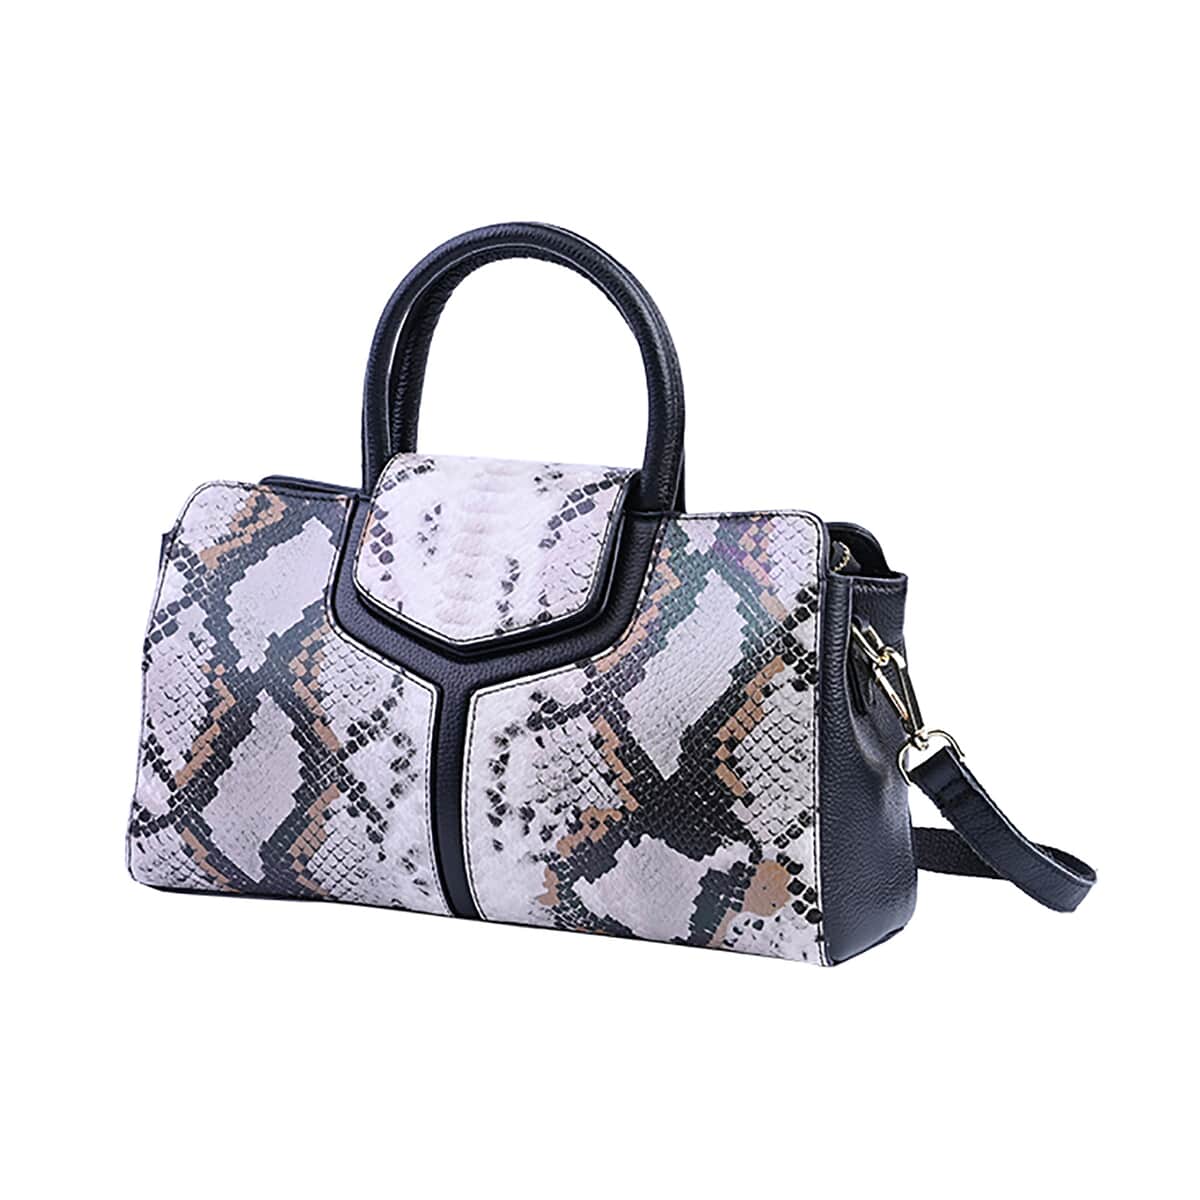 Hong Kong Closeout Collection Black and White Snakeskin Print Genuine Leather Convertible Tote Bag with Flap Lock & Zip Closure image number 4